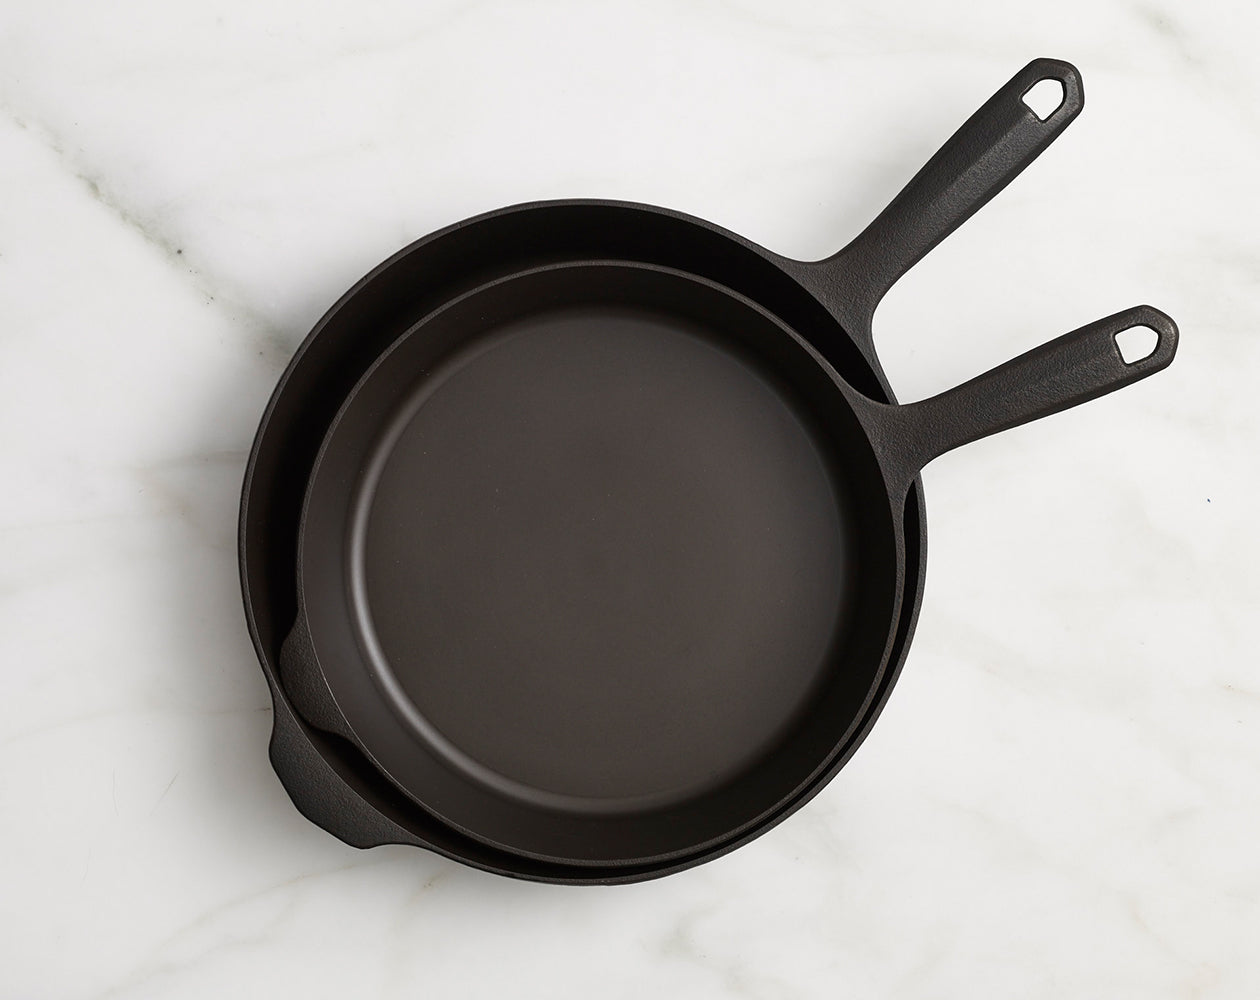 The Best Pan for Cooking Eggs: Cast Iron vs. Carbon Steel